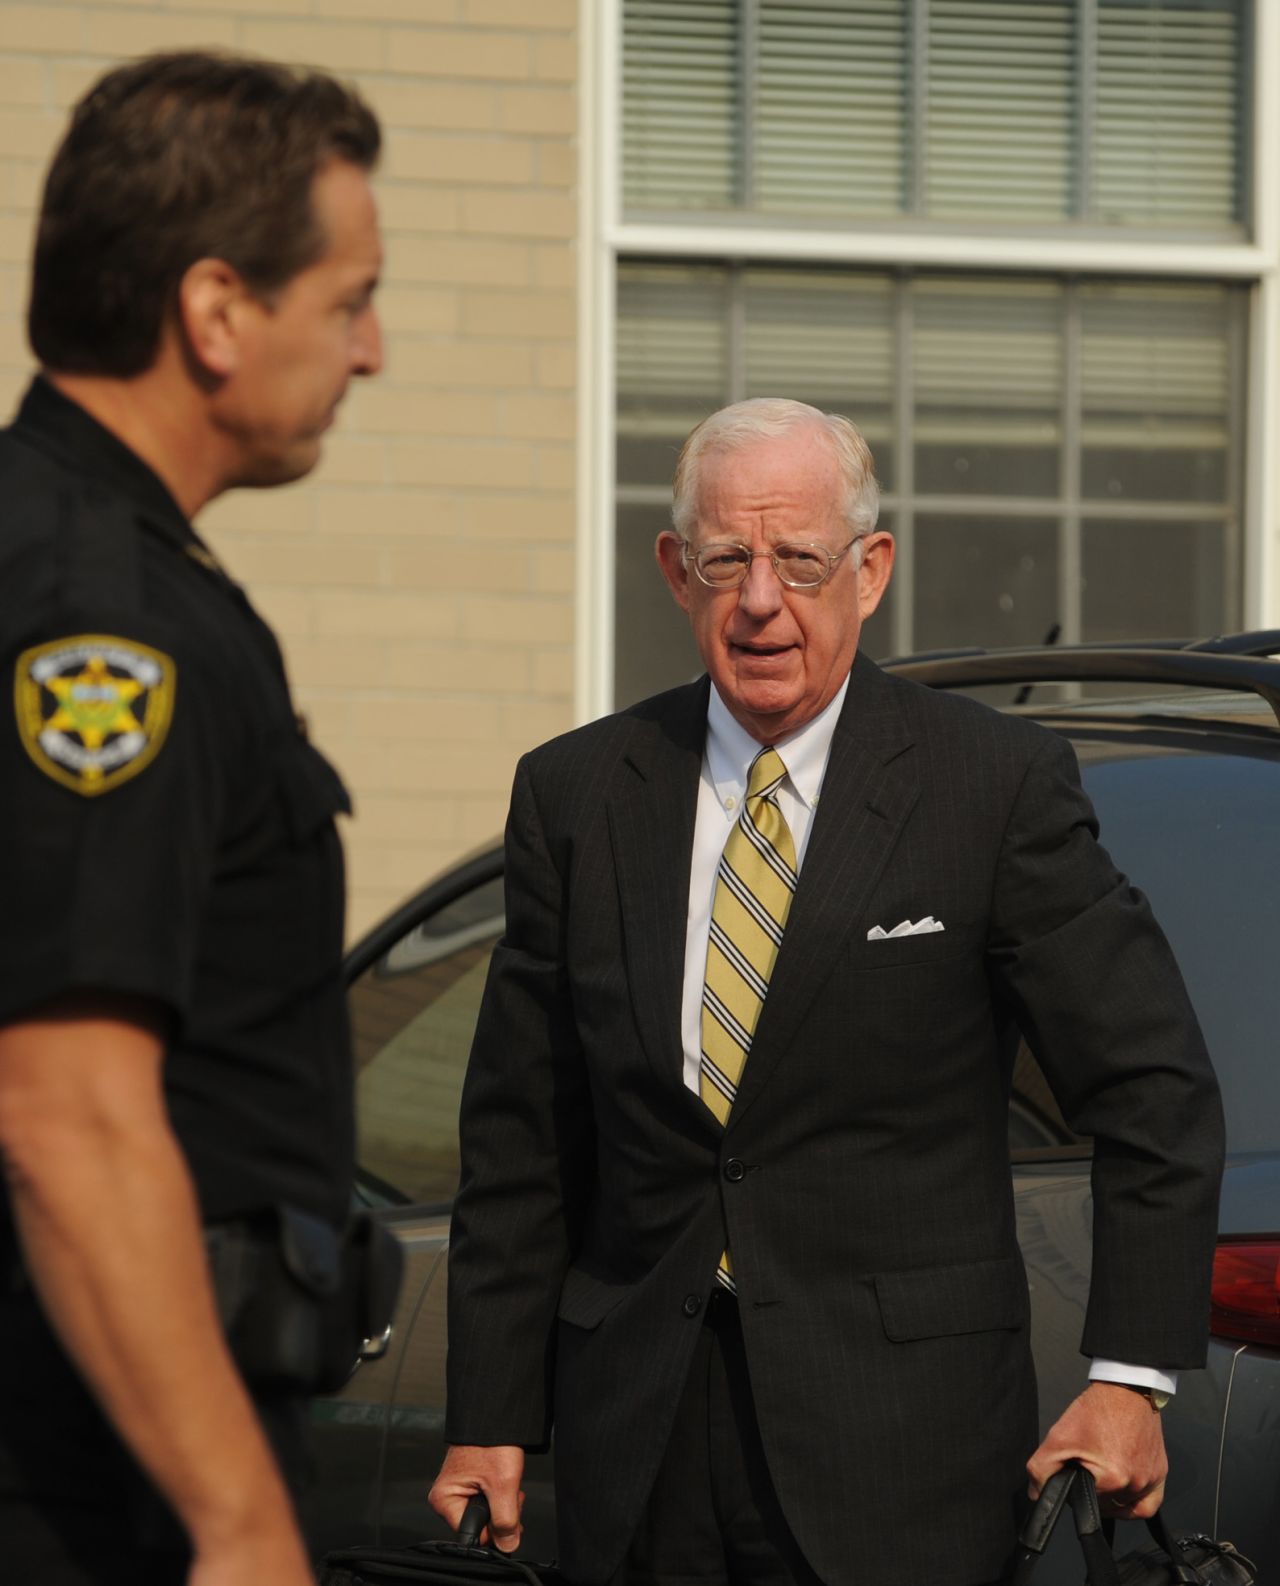 Judge John Cleland walks into the courthouse. Once the jury reached its decision, he revoked Sandusky's bail and ordered his arrest.